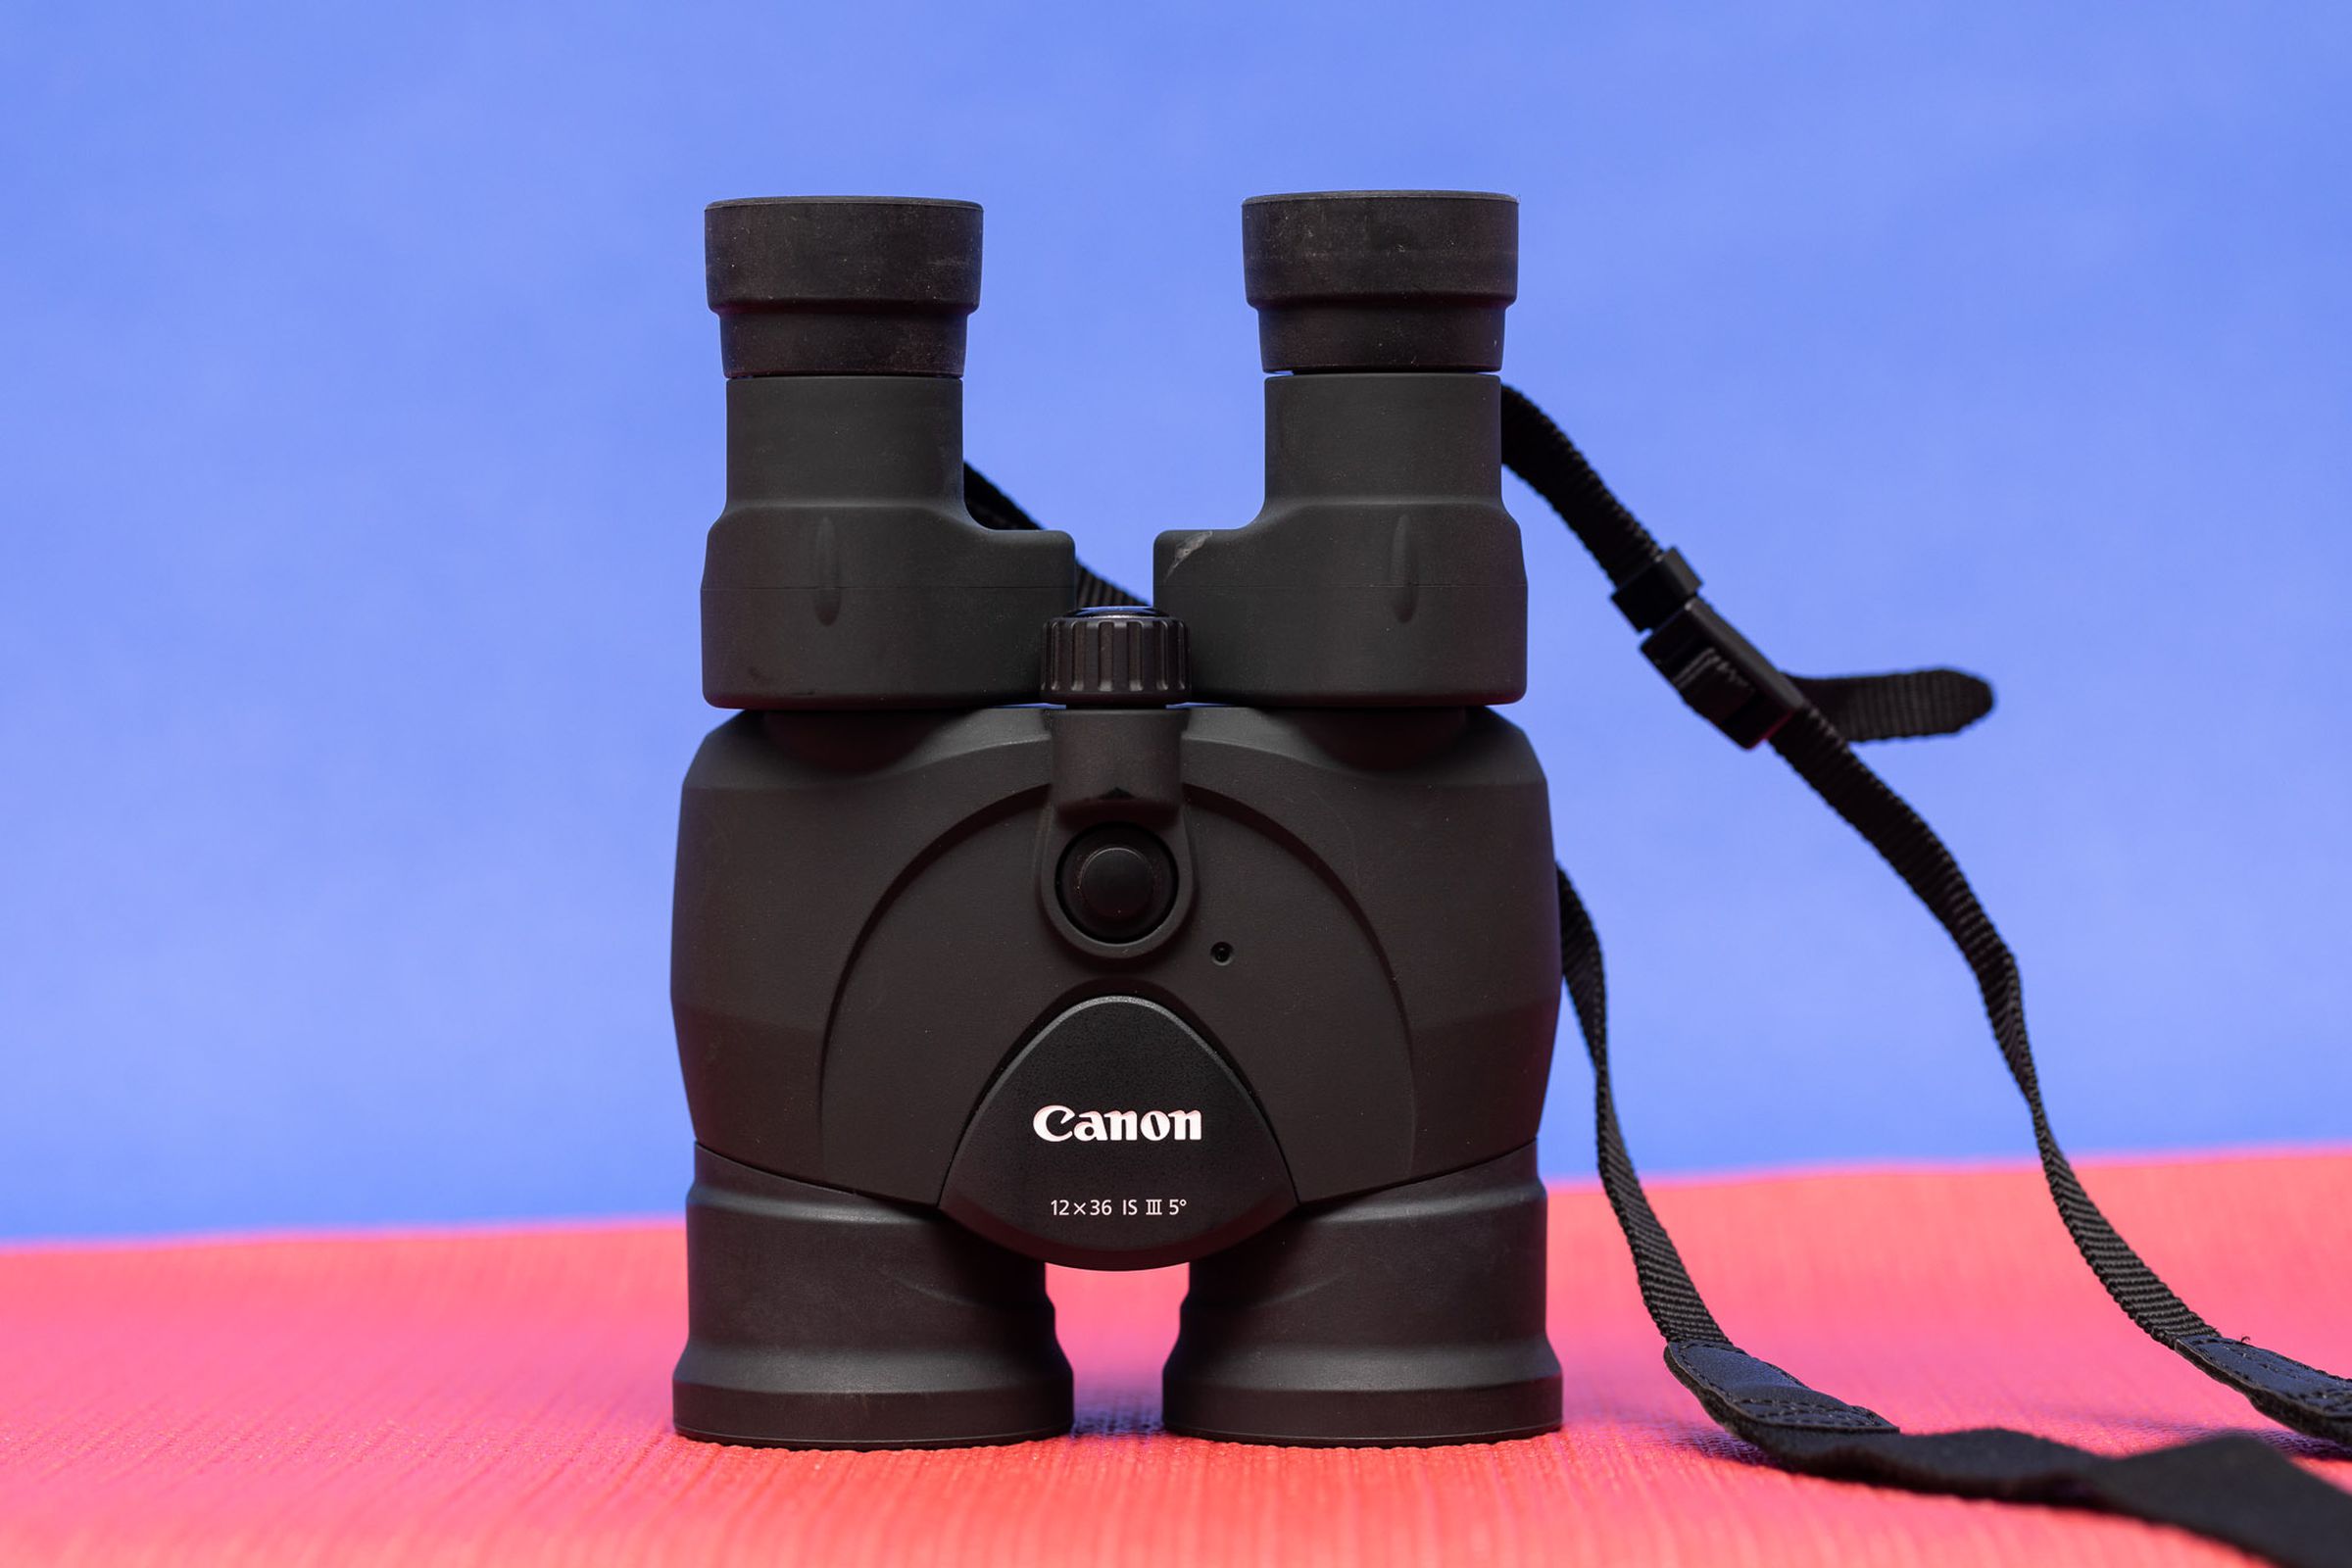 Binoculars come in many different magnifications, from 8x to 18x, and with different grades of glass.